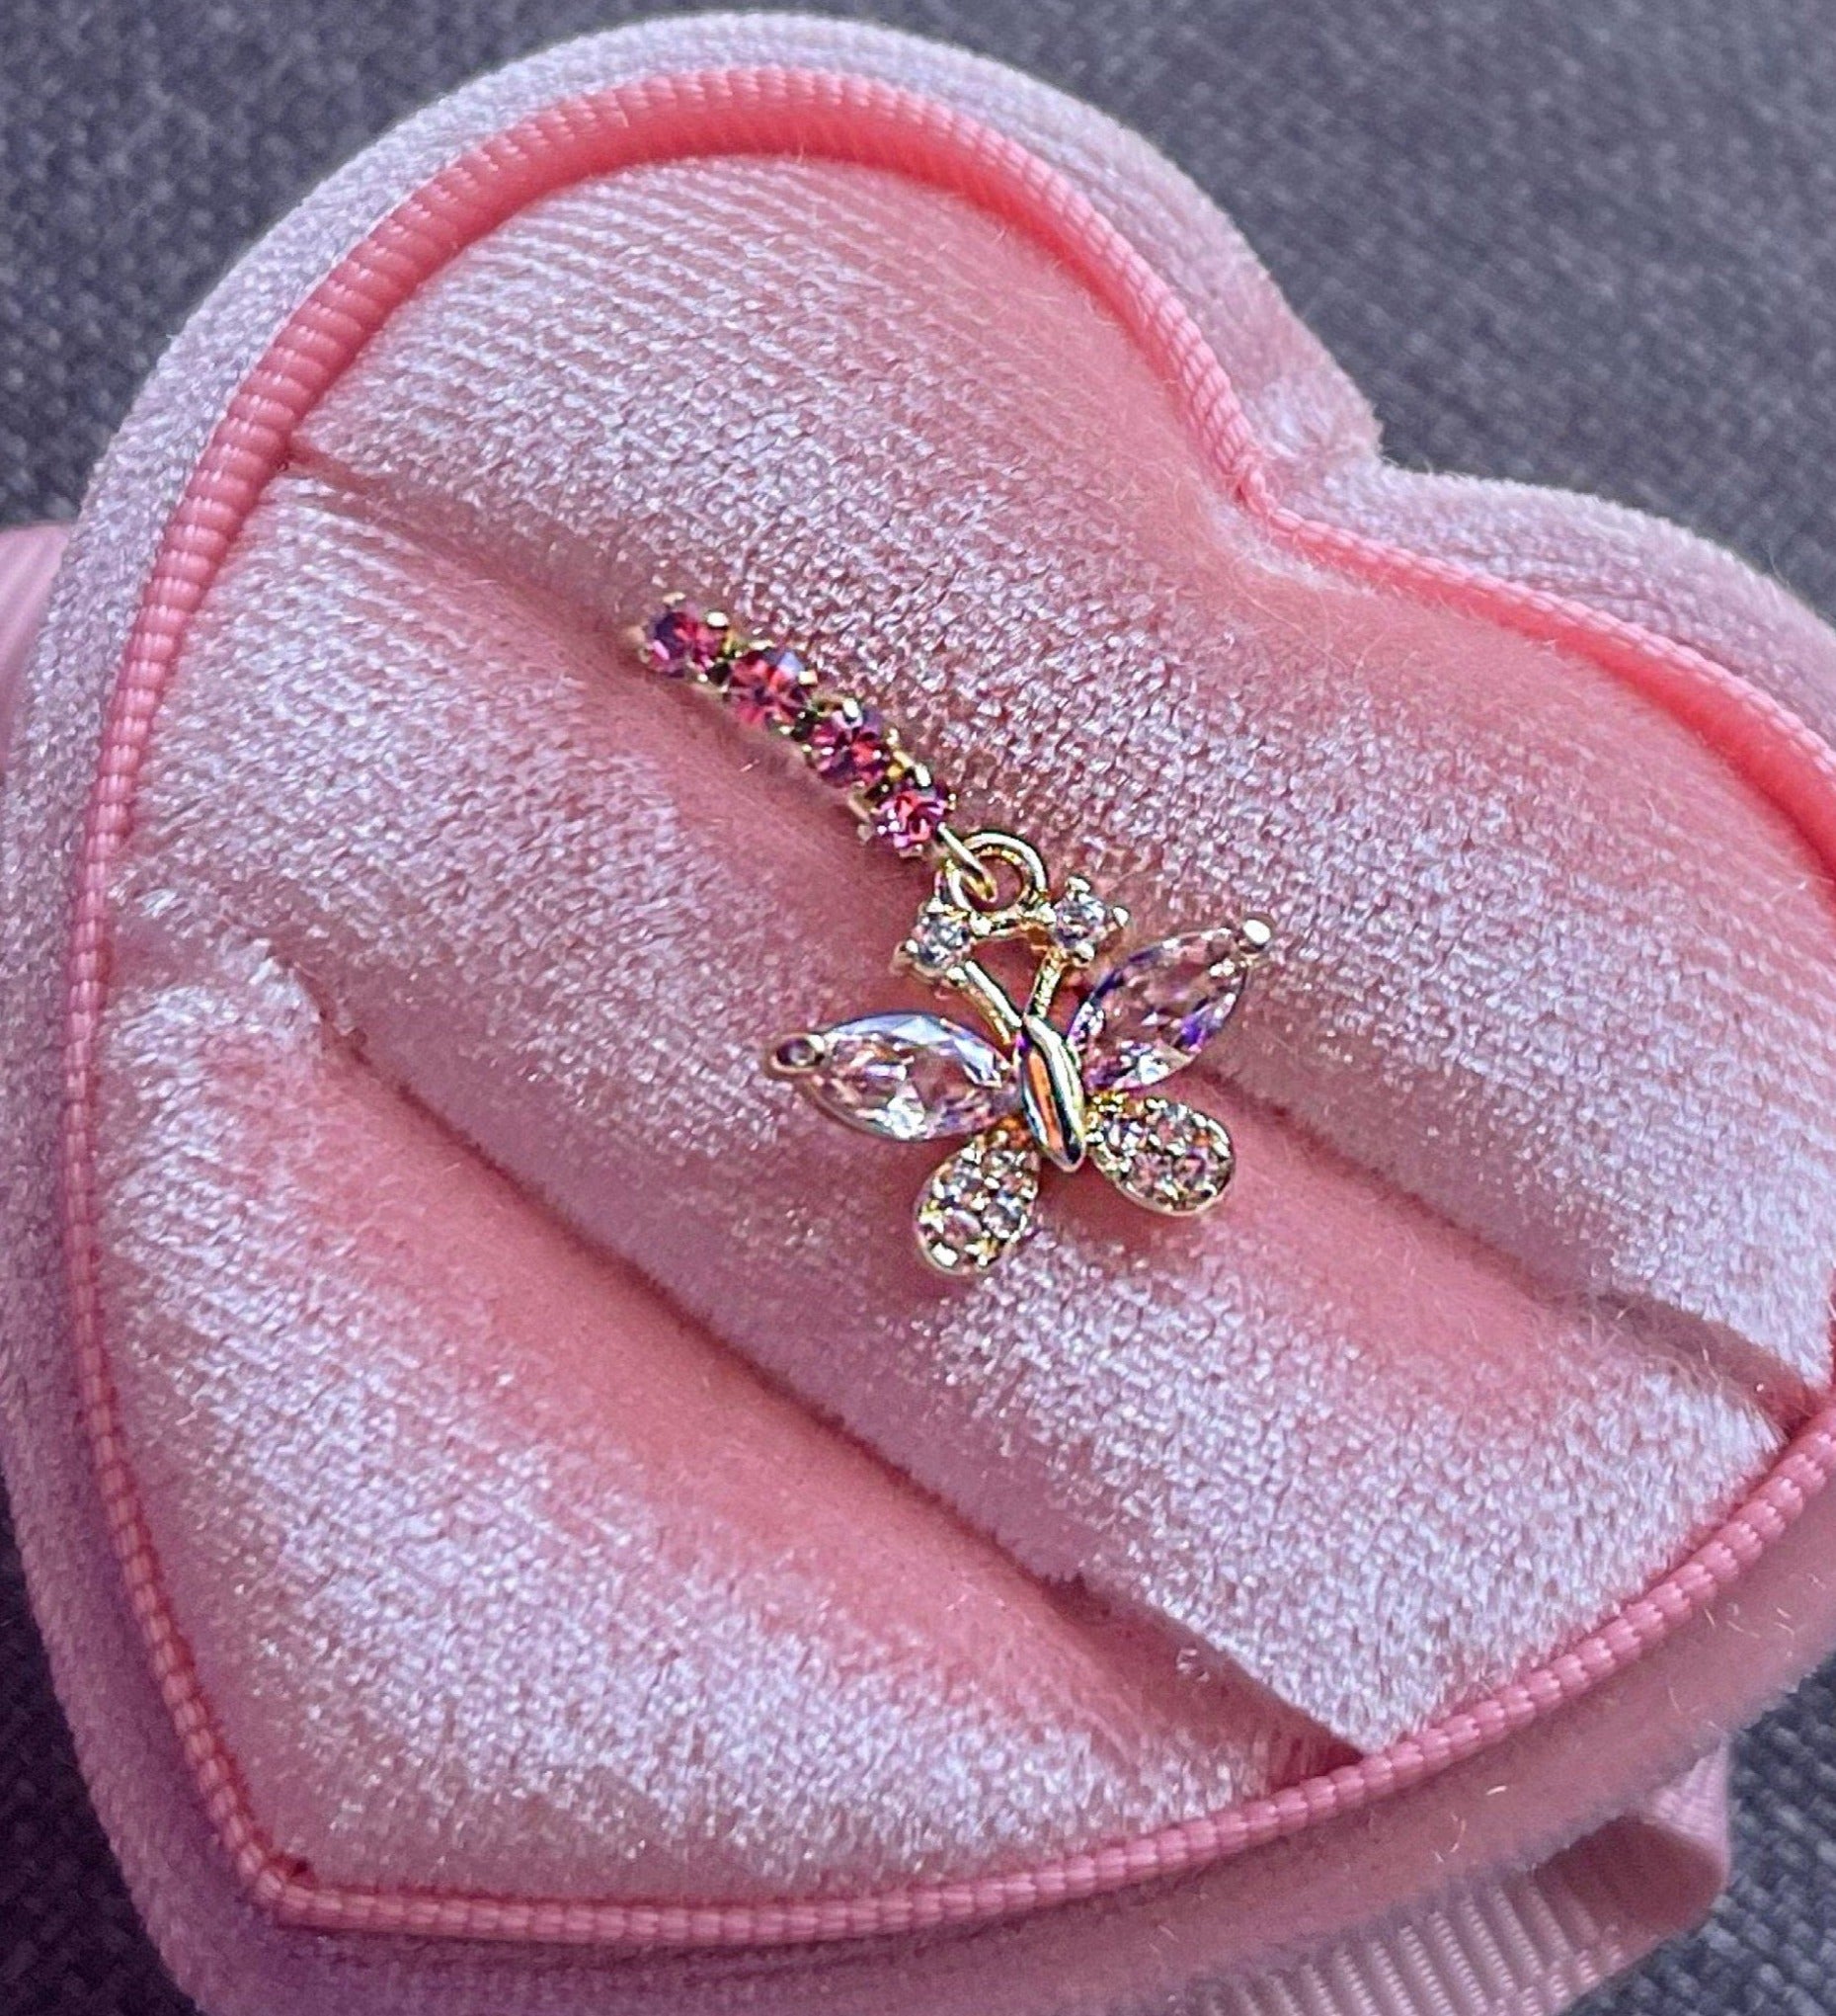 PINK/WHITE BUTTERFLY Nose Ring